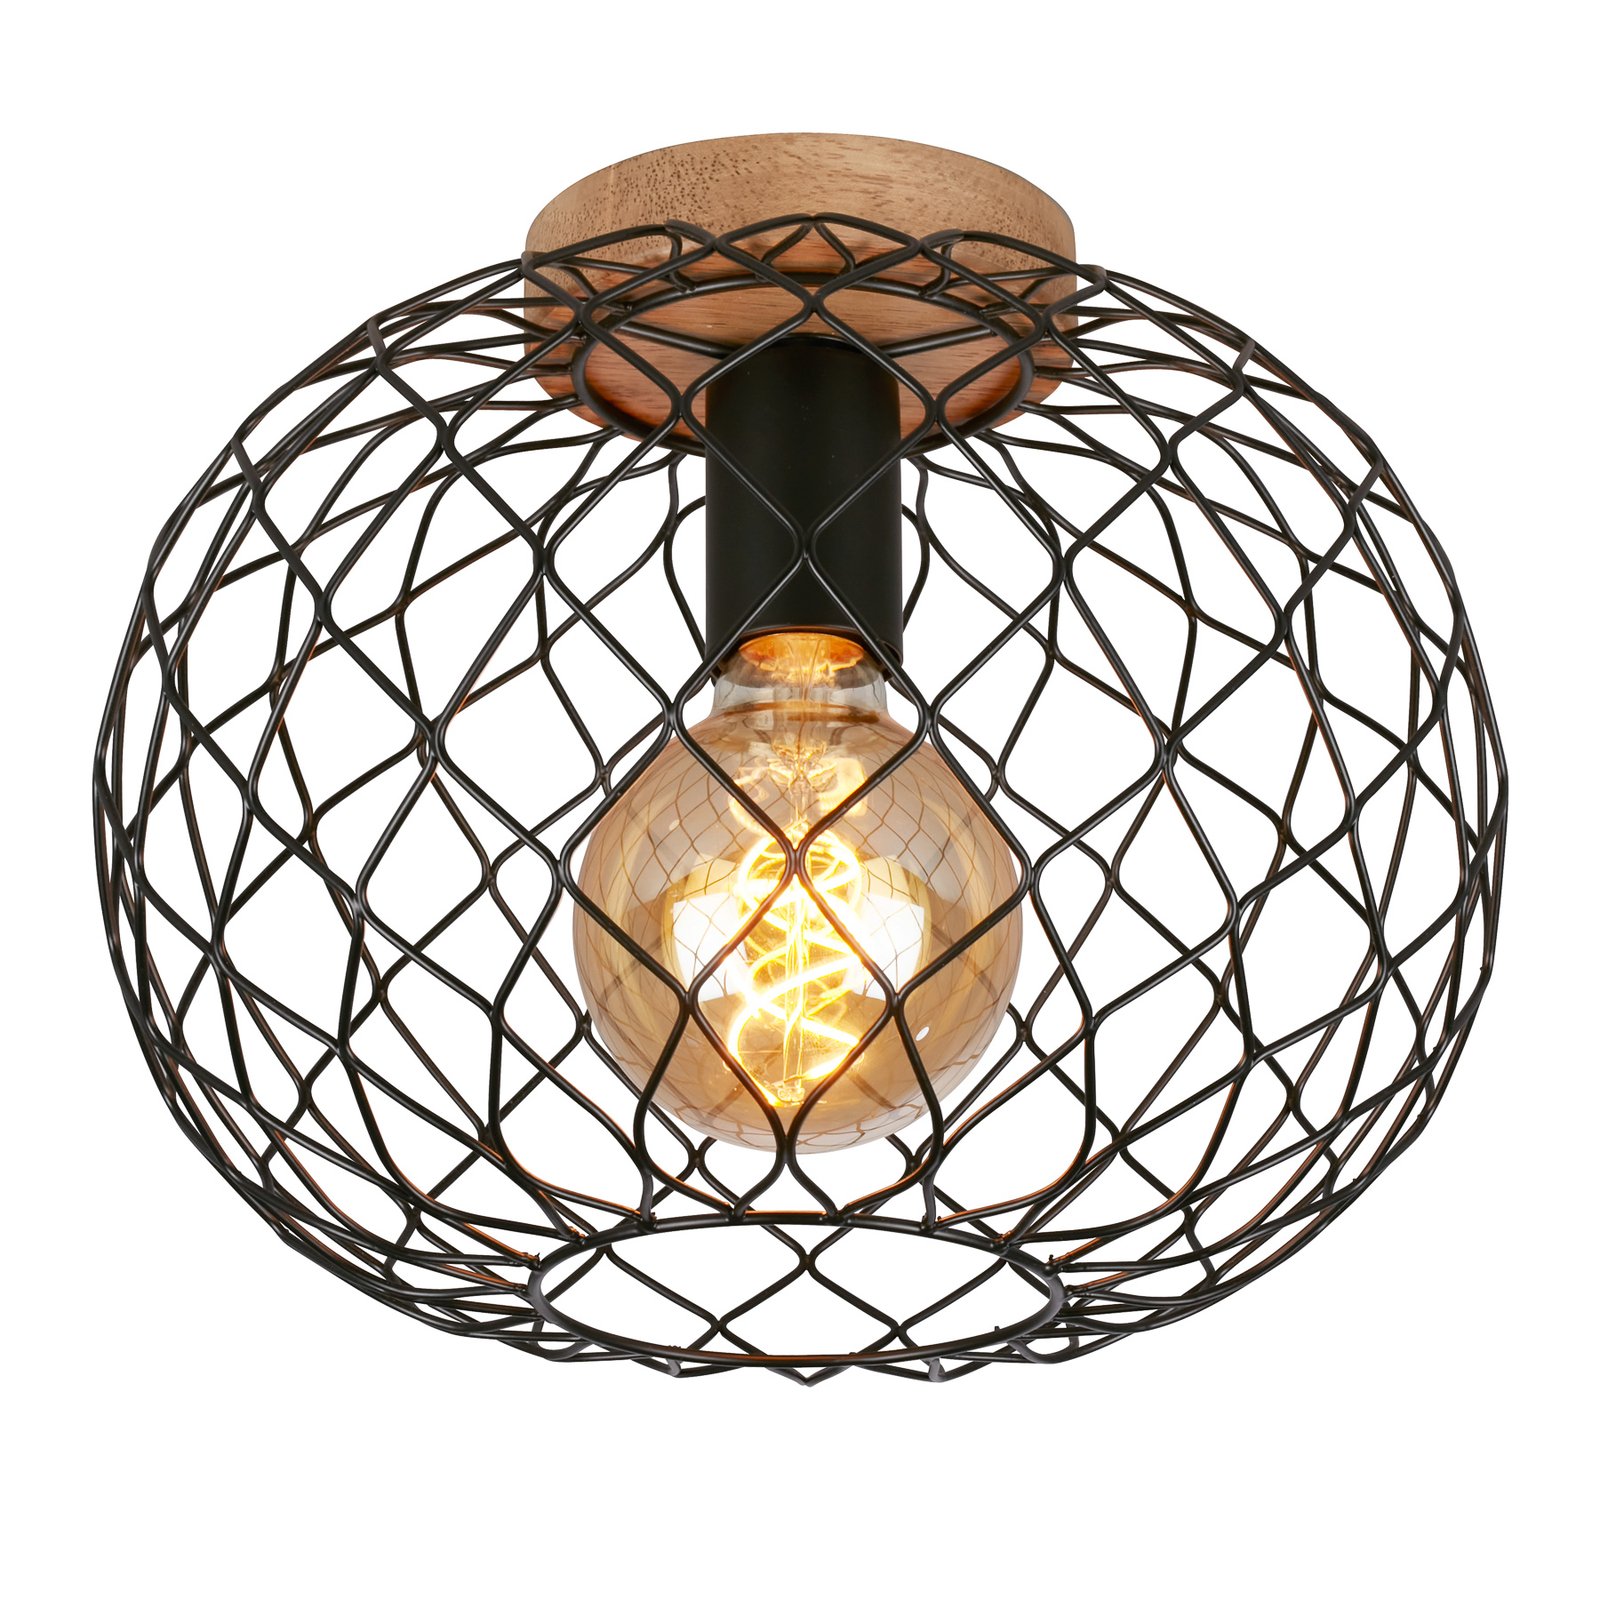 Winki ceiling light with a lattice structure